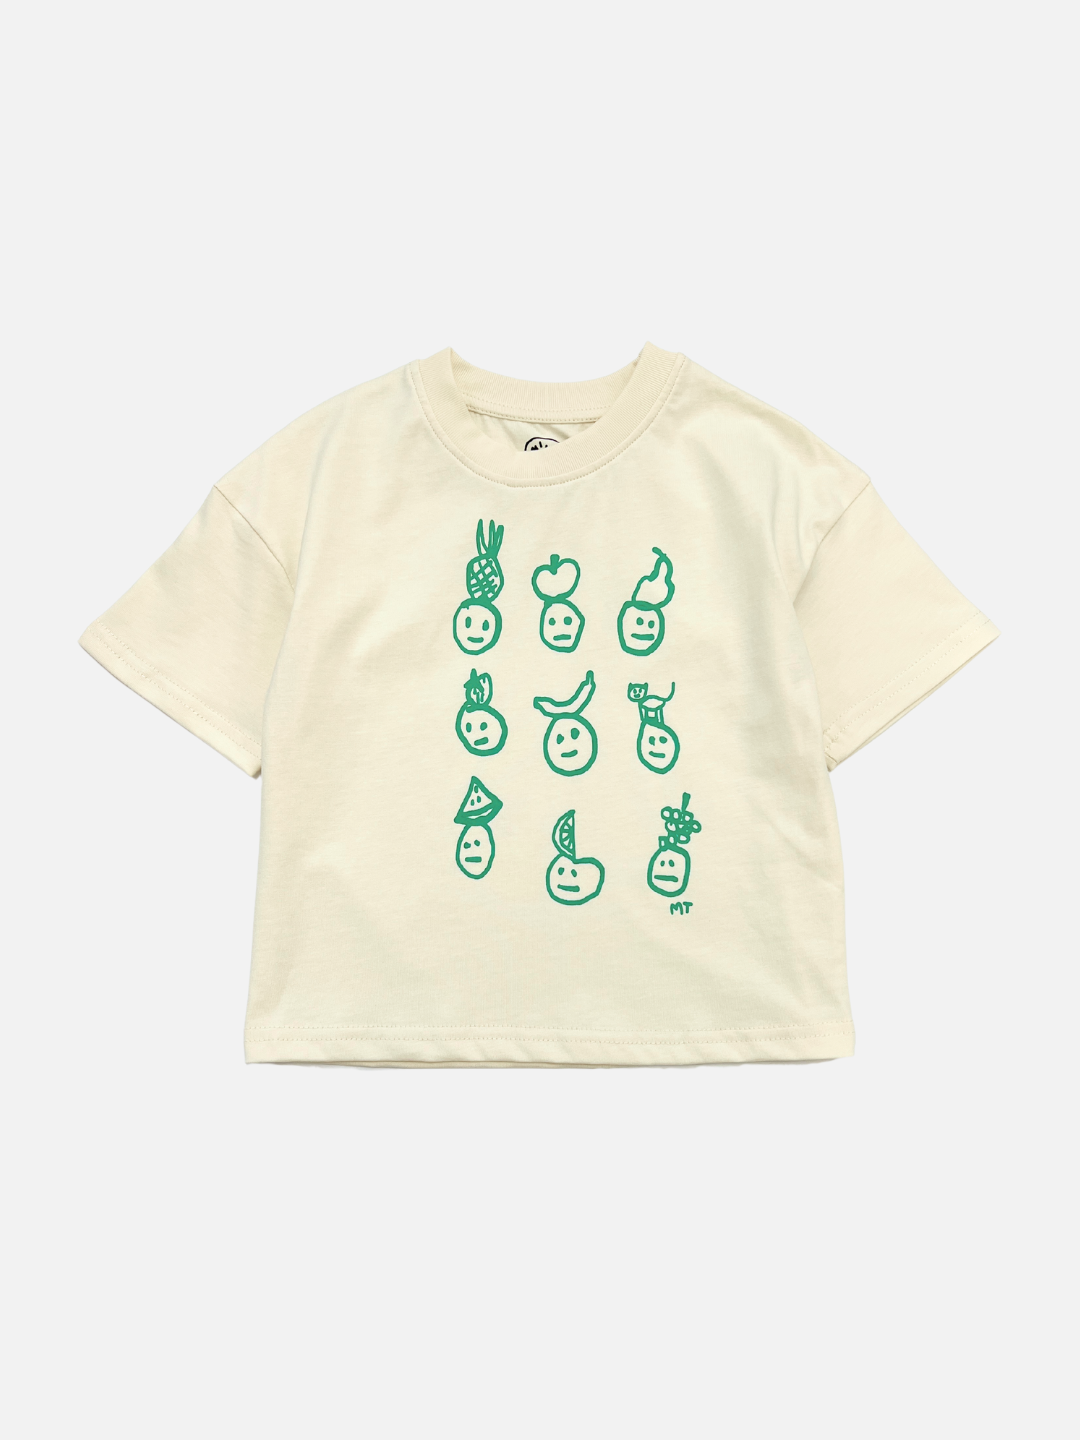 A front view of the kids' Fruit Face tee in Cream. Printed faces are wearing fruit hats, all in green color.